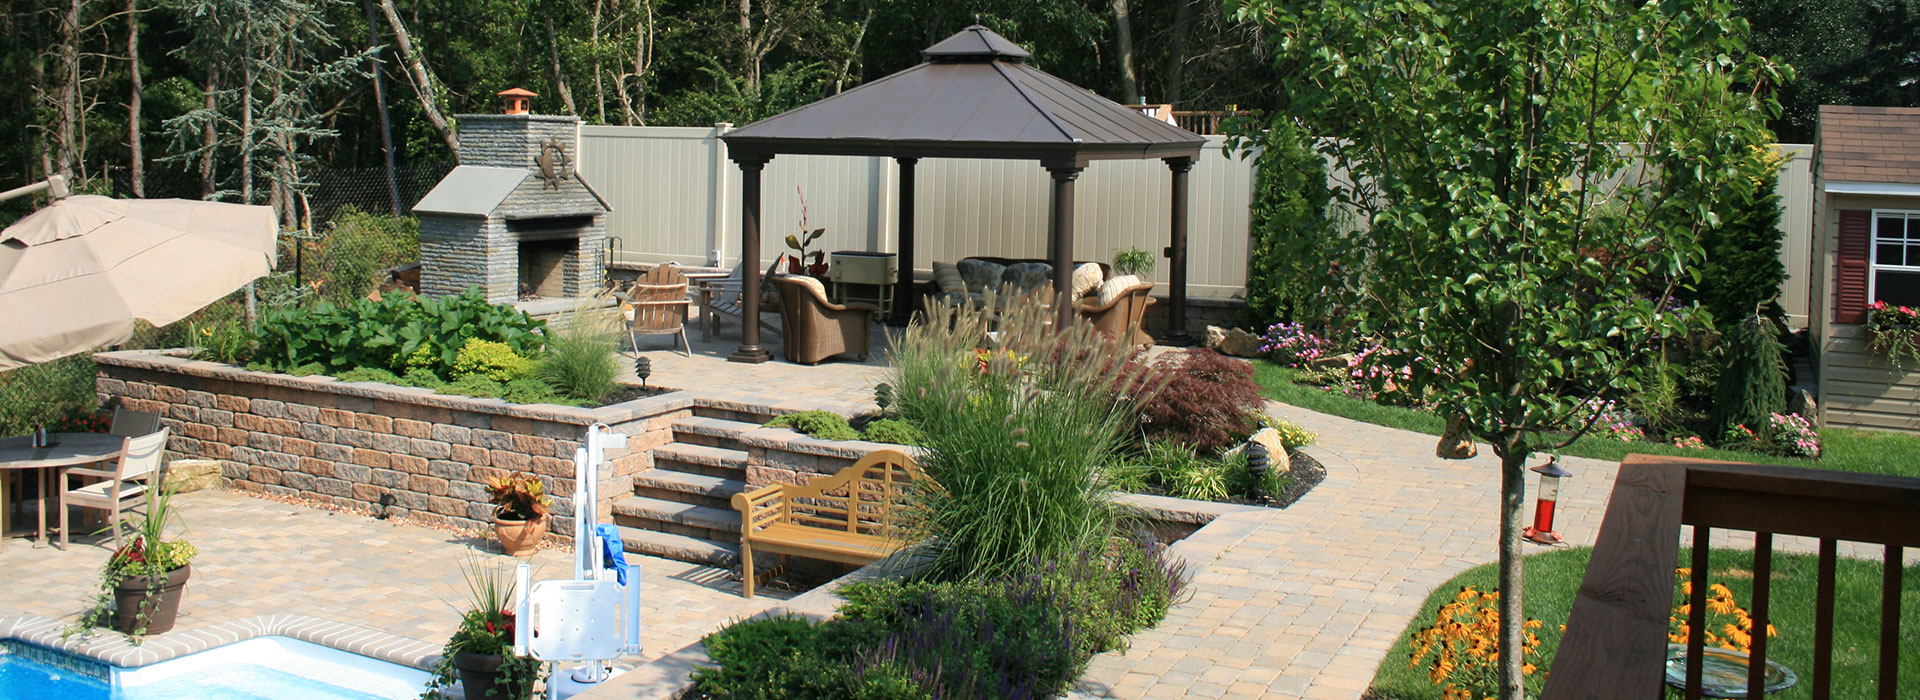 Plainville, MA Landscaping